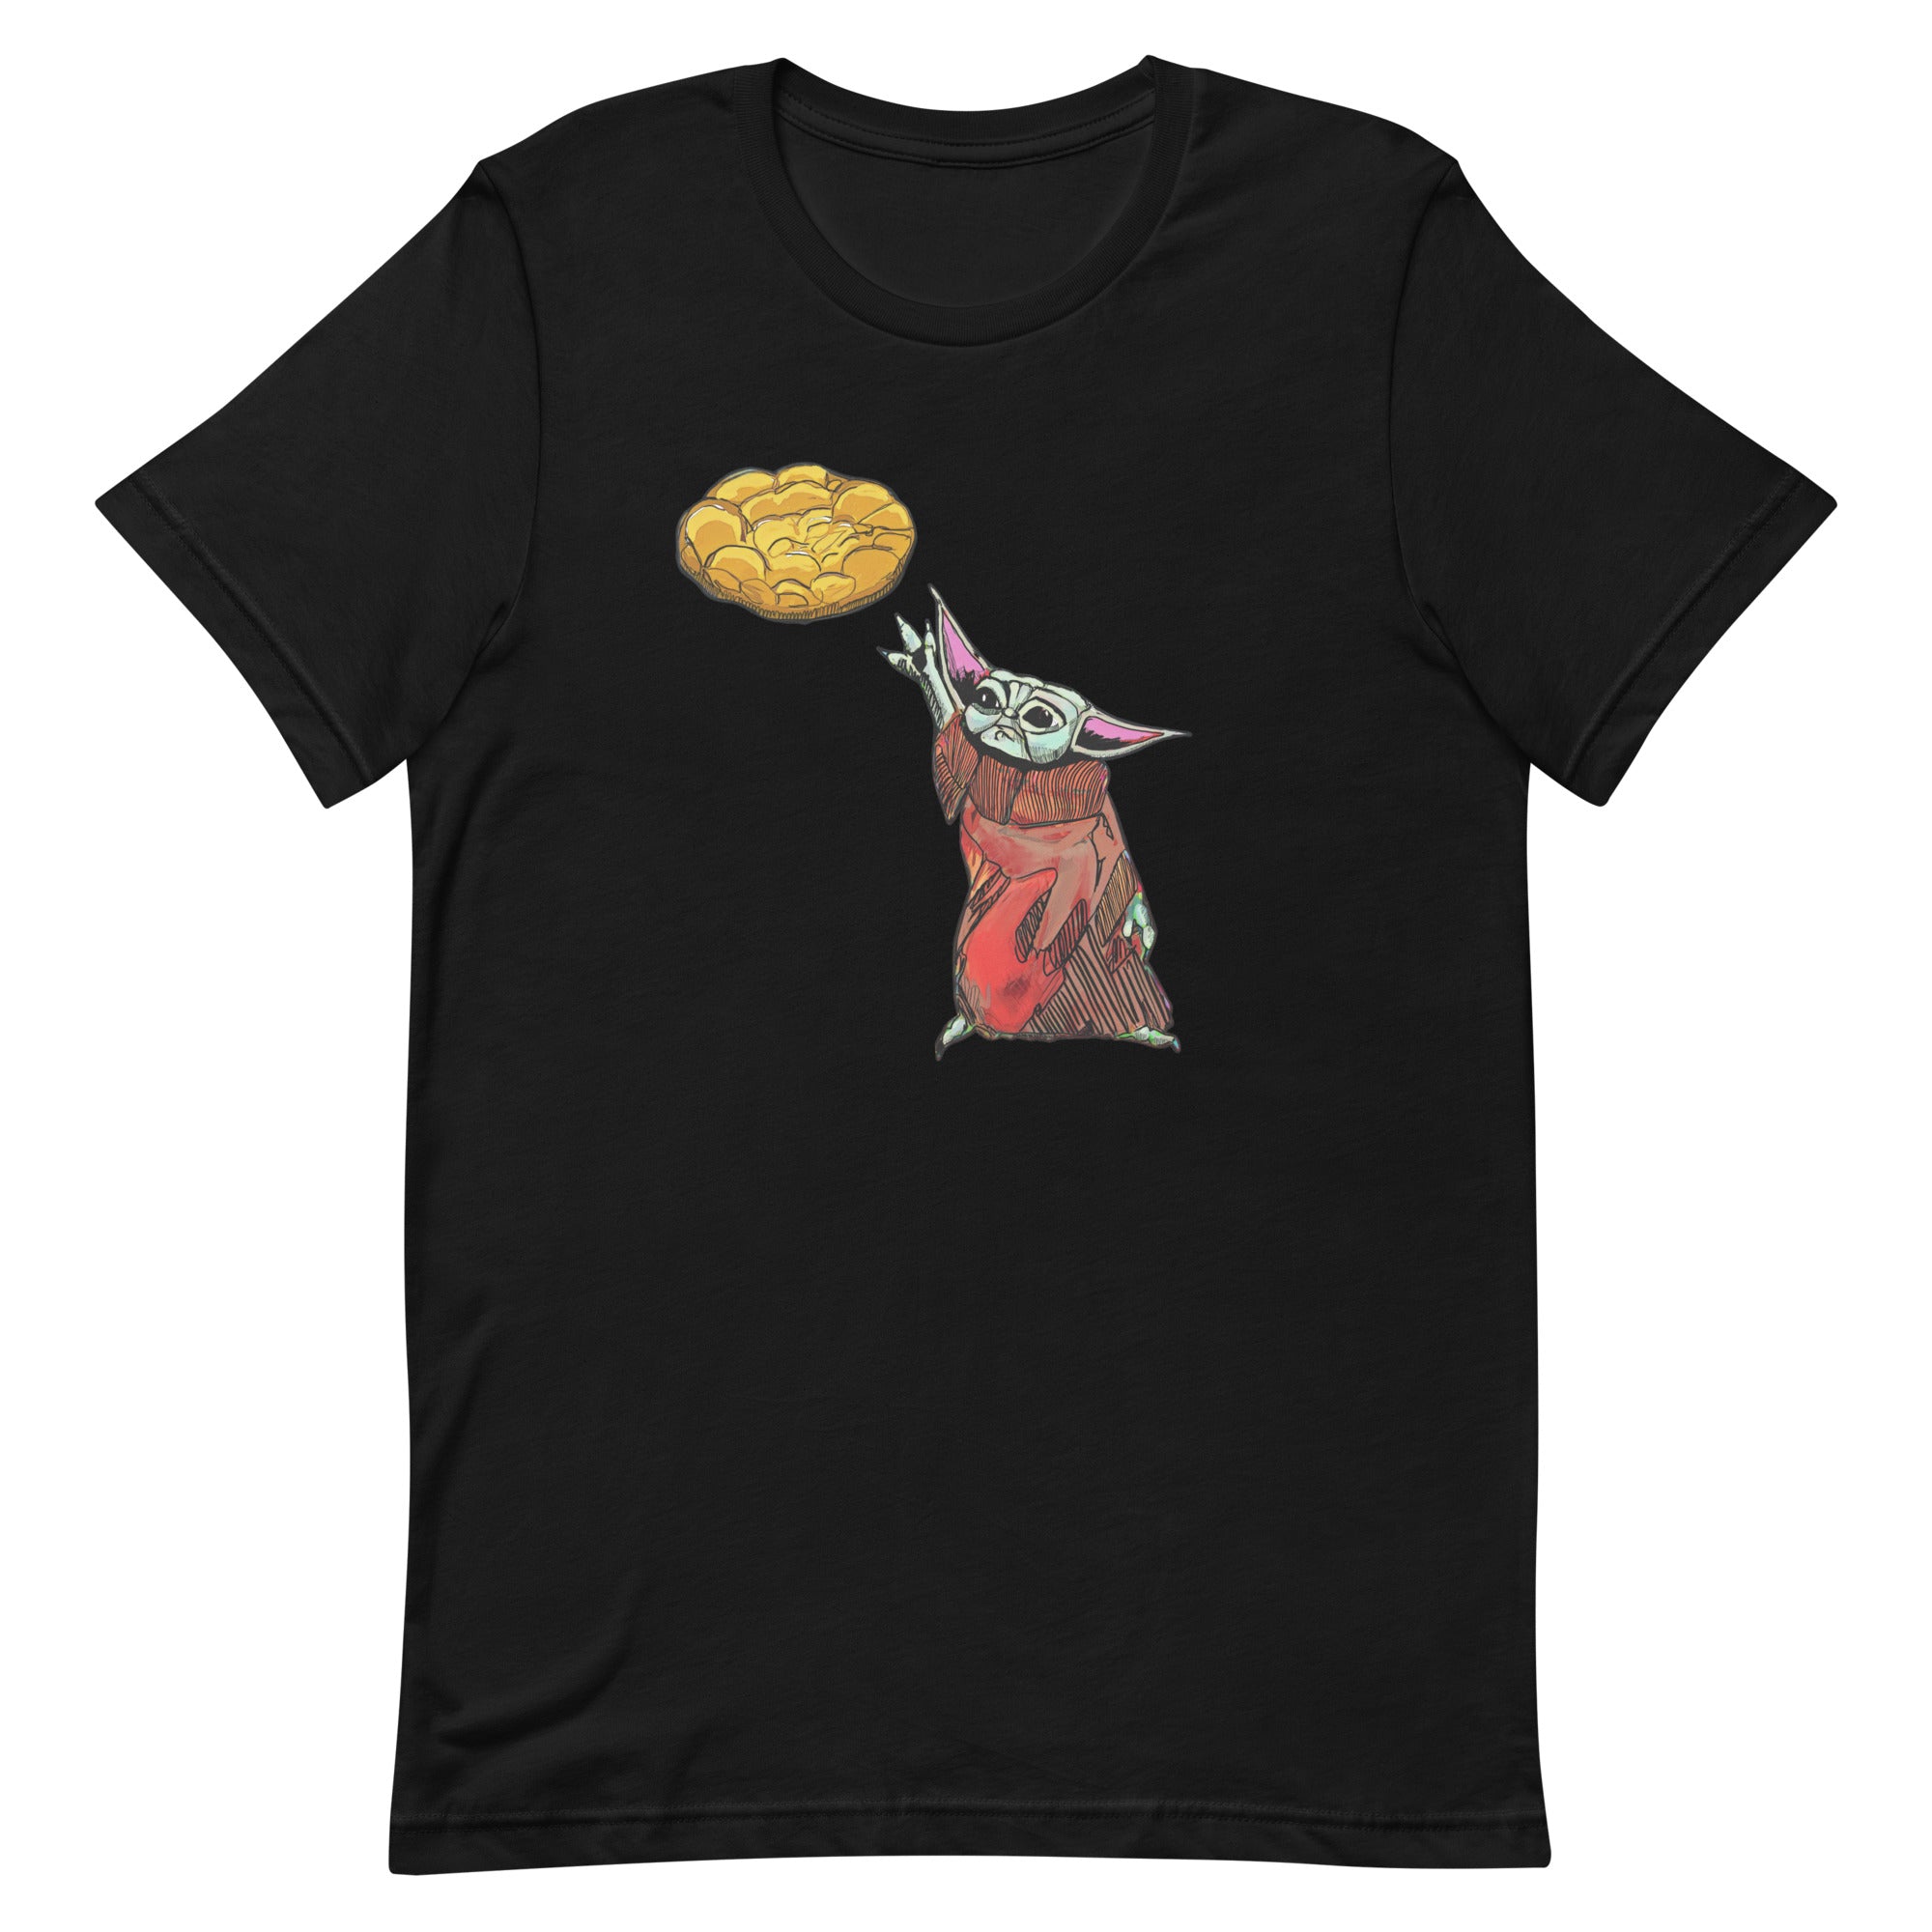 Frybread Force t-shirt